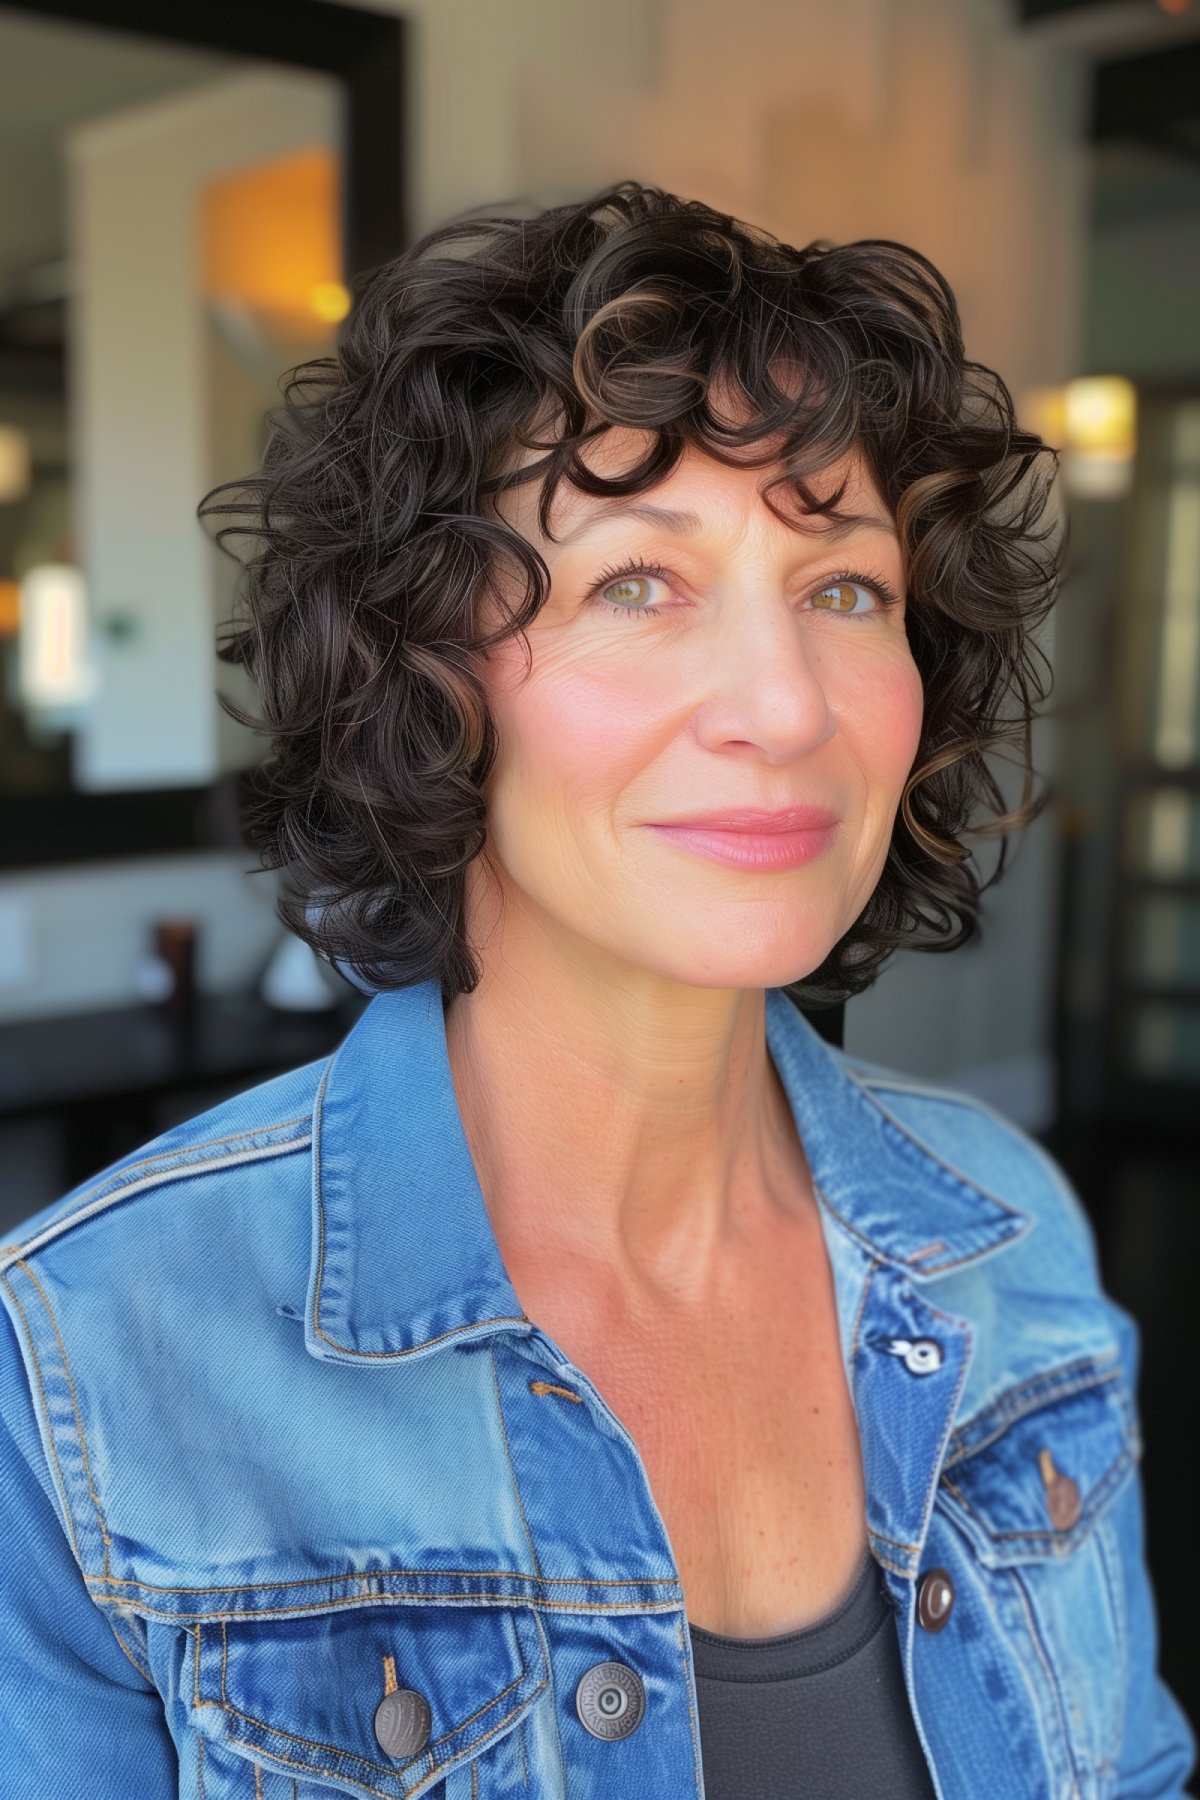 Mature woman with a medium-length curly bob hairstyle smiling in a casual setting